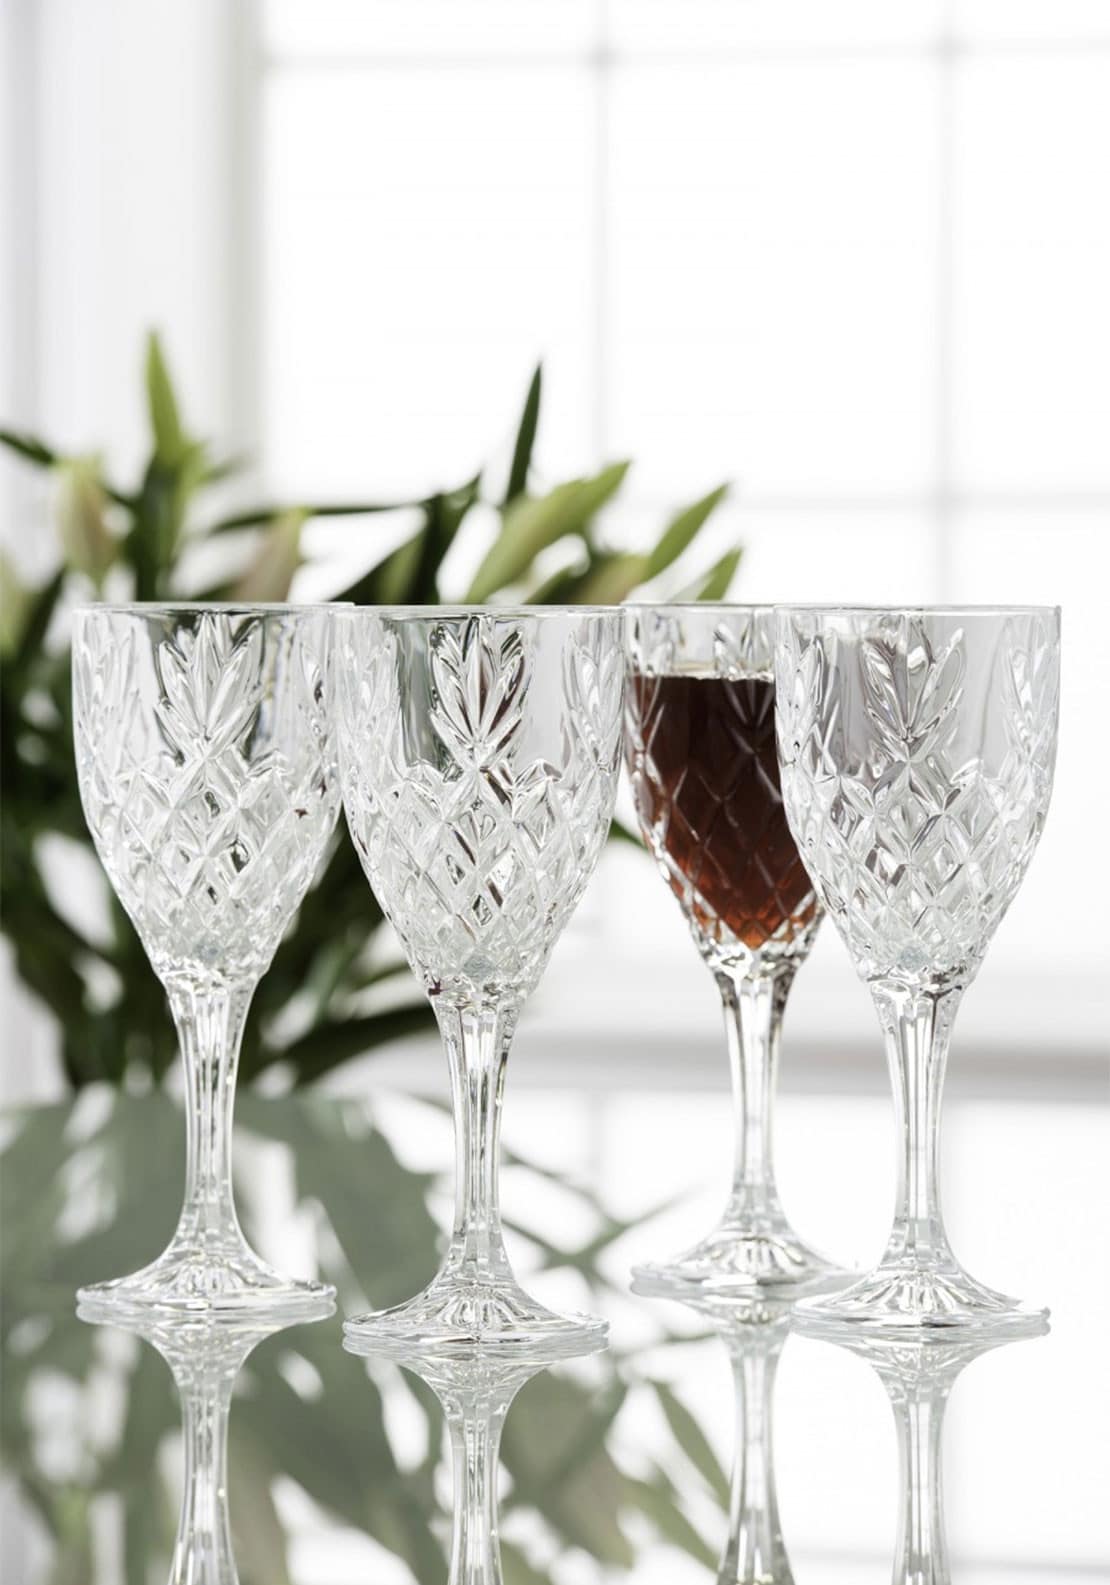 Galway Crystal Renmore Goblet Set of 4 - Ashford Collection